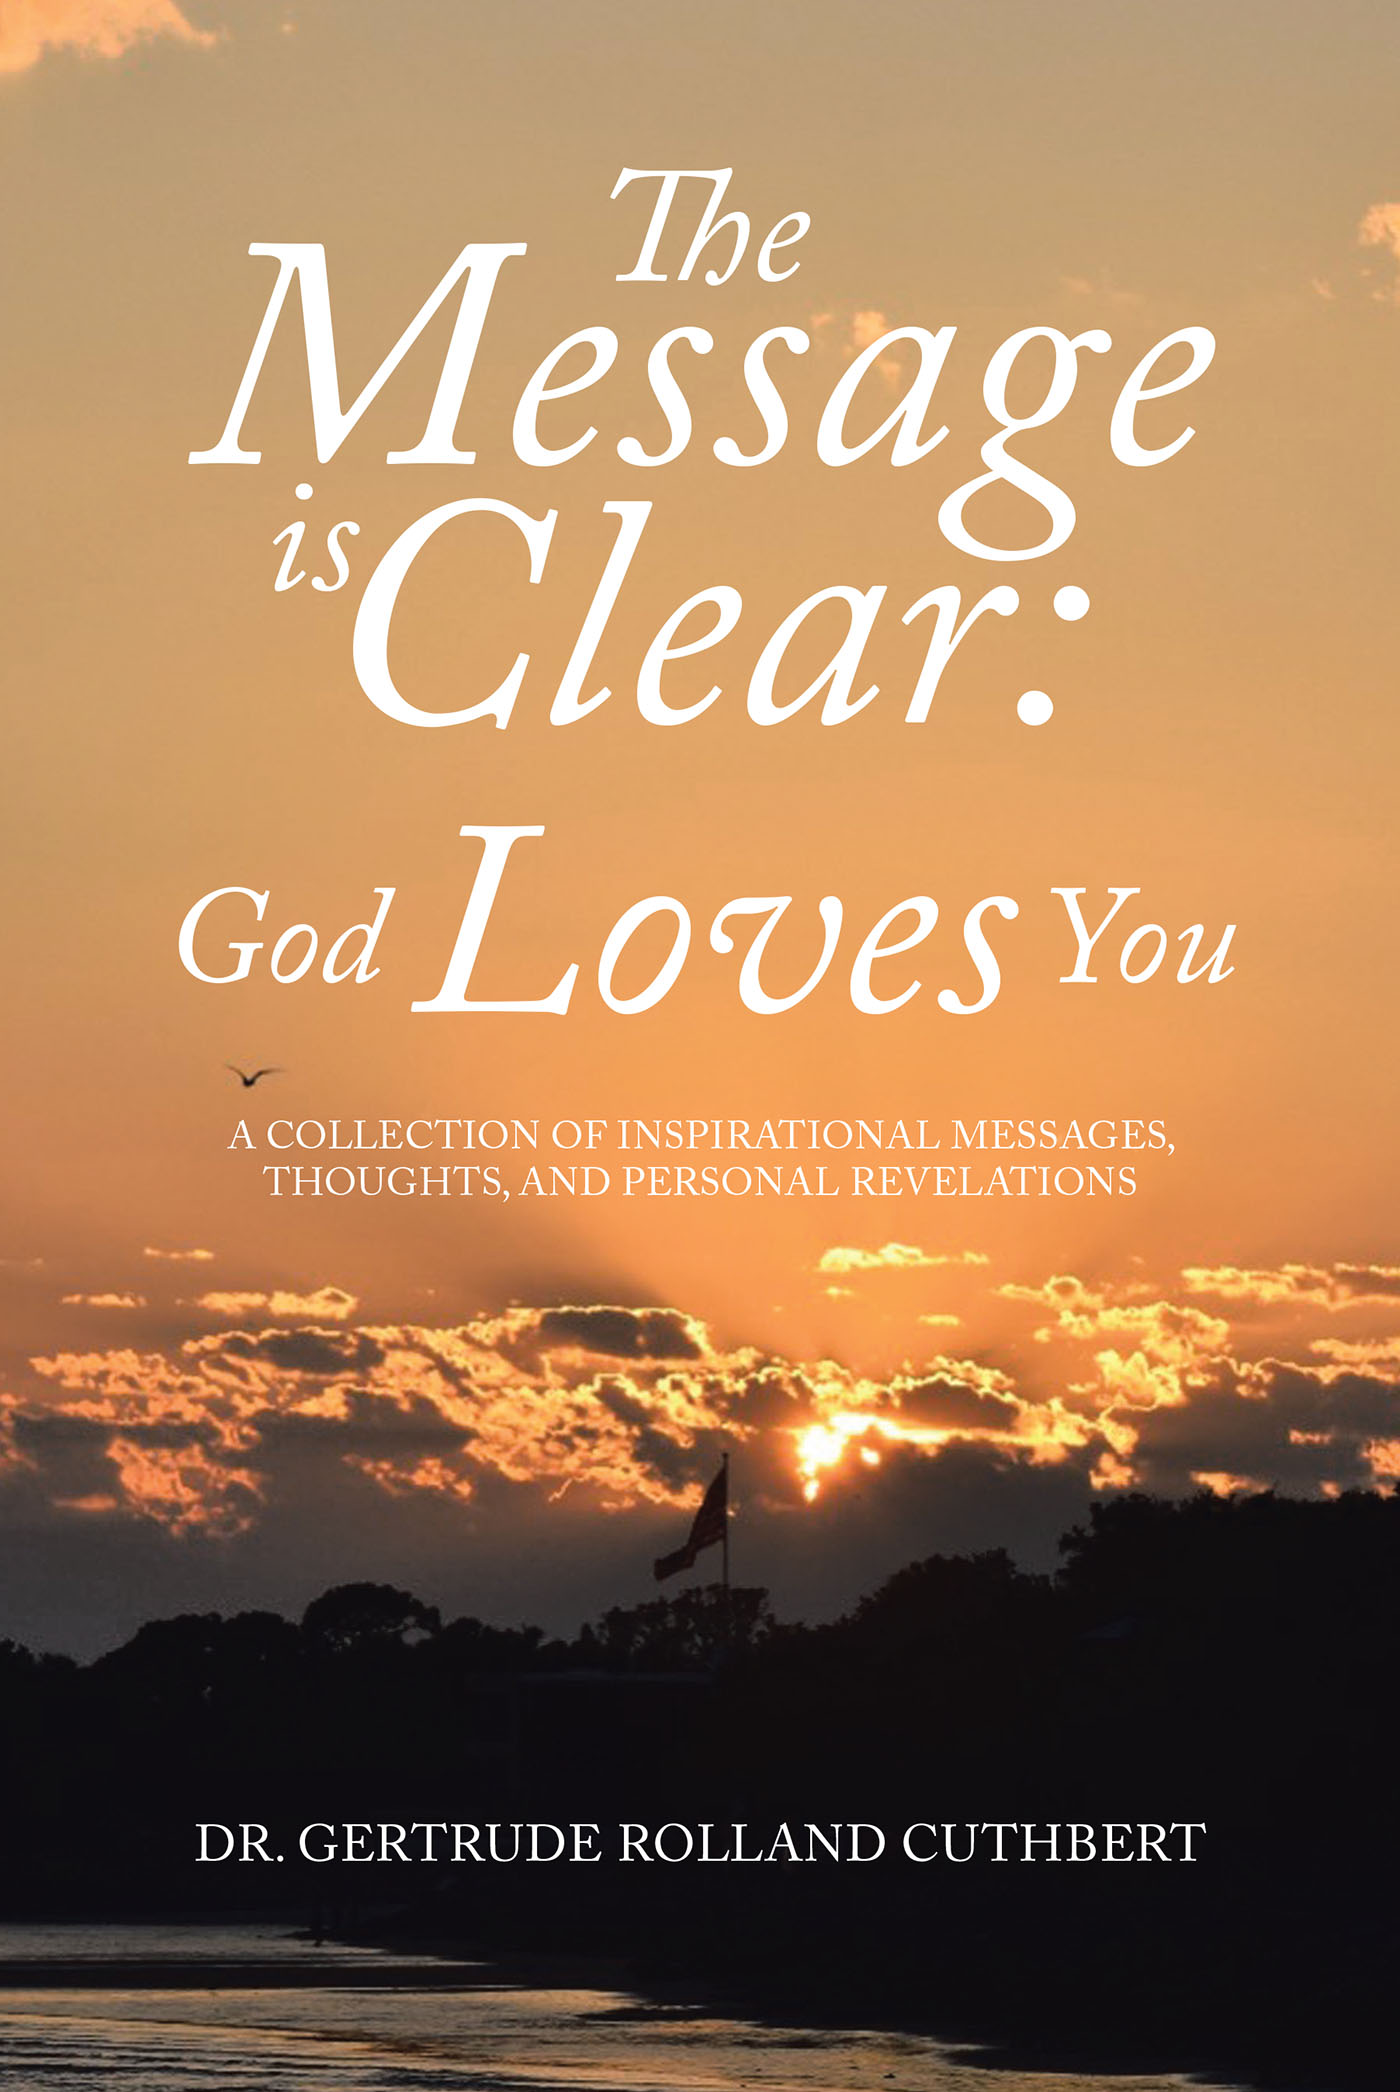 Dr. Gertrude Rolland Cuthbert’s Newly Released "The Message is Clear: God Loves You" is a Touching Celebration of Faith That Supports Others in Their Spiritual Awakening